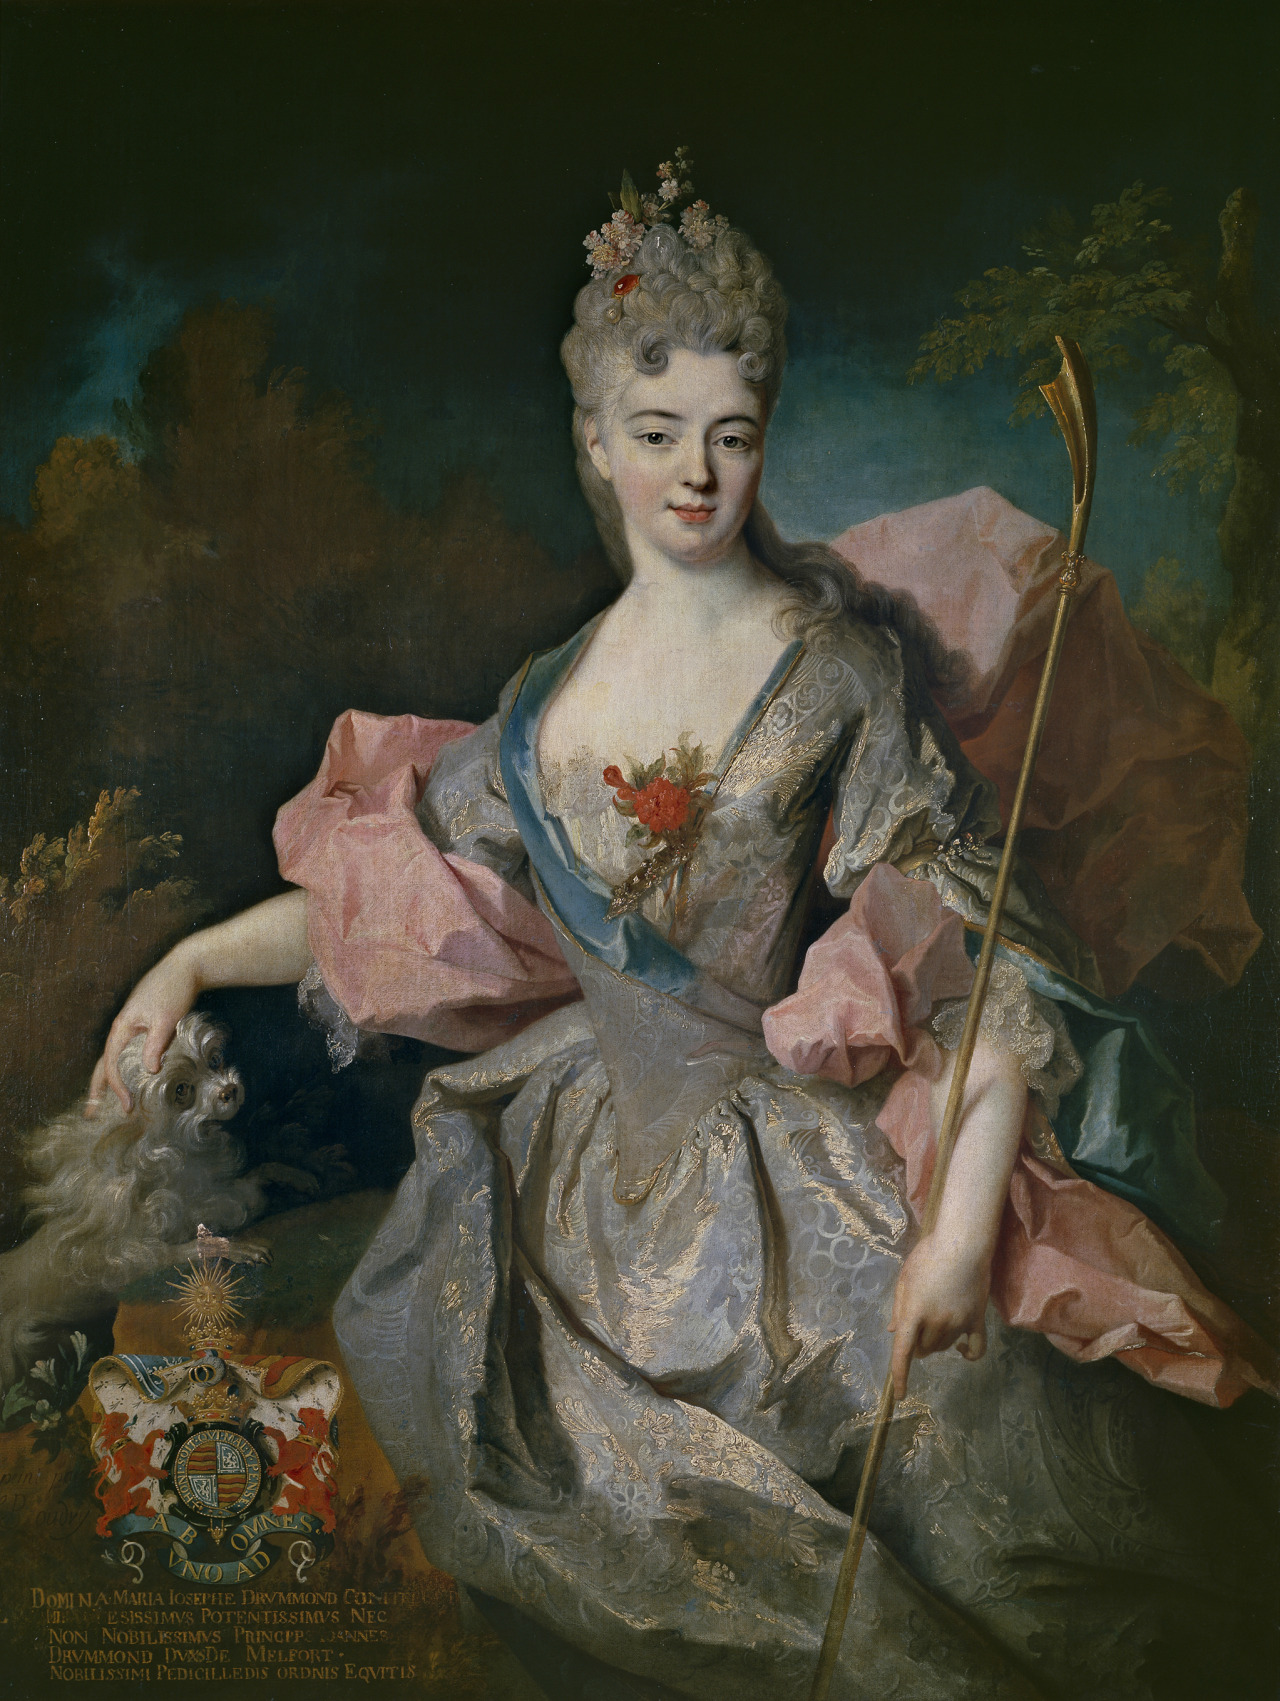 Portrait of María Josefa Drummond, Countess of Castelblanco (c.1716). Jean-Baptiste Oudry (French, 1686-1755). Oil on canvas. Museo del Prado.
The sitter was the daughter of John Drummond, Duke of Melfort, one of James II’s principal councillors in...